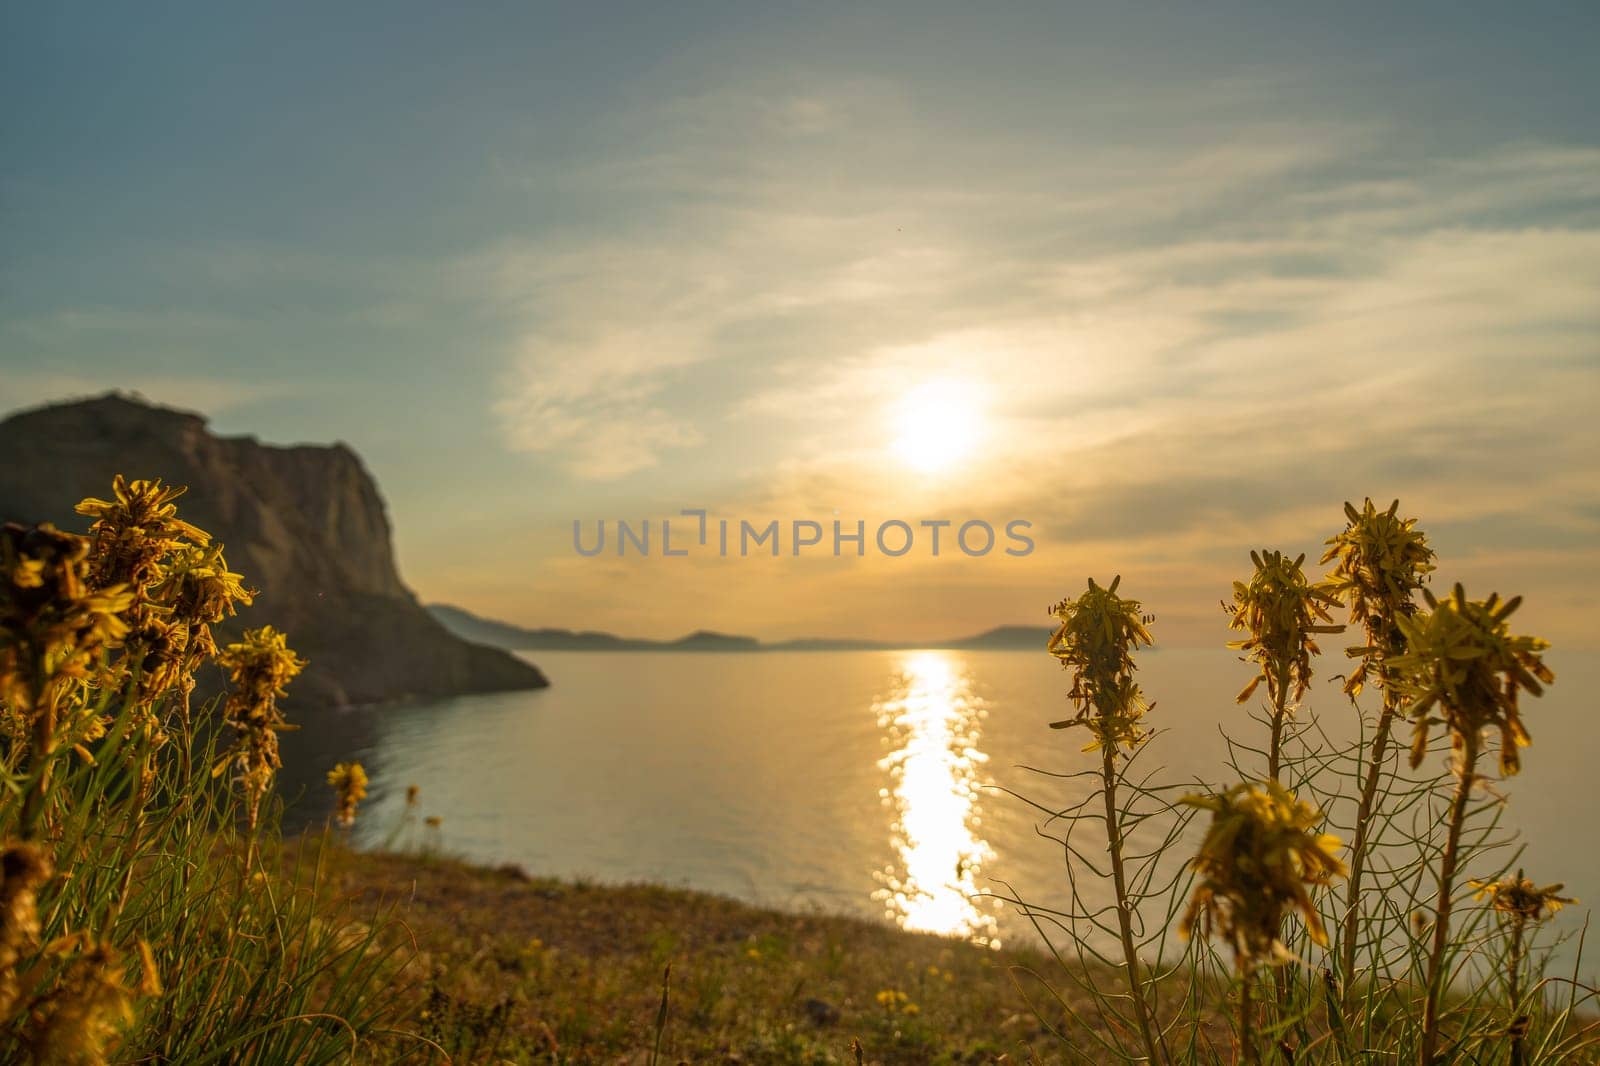 A beautiful sunset over the ocean with a rocky cliff in the background. The sun is setting and the sky is filled with clouds. The flowers are yellow and they are scattered throughout the field. by Matiunina